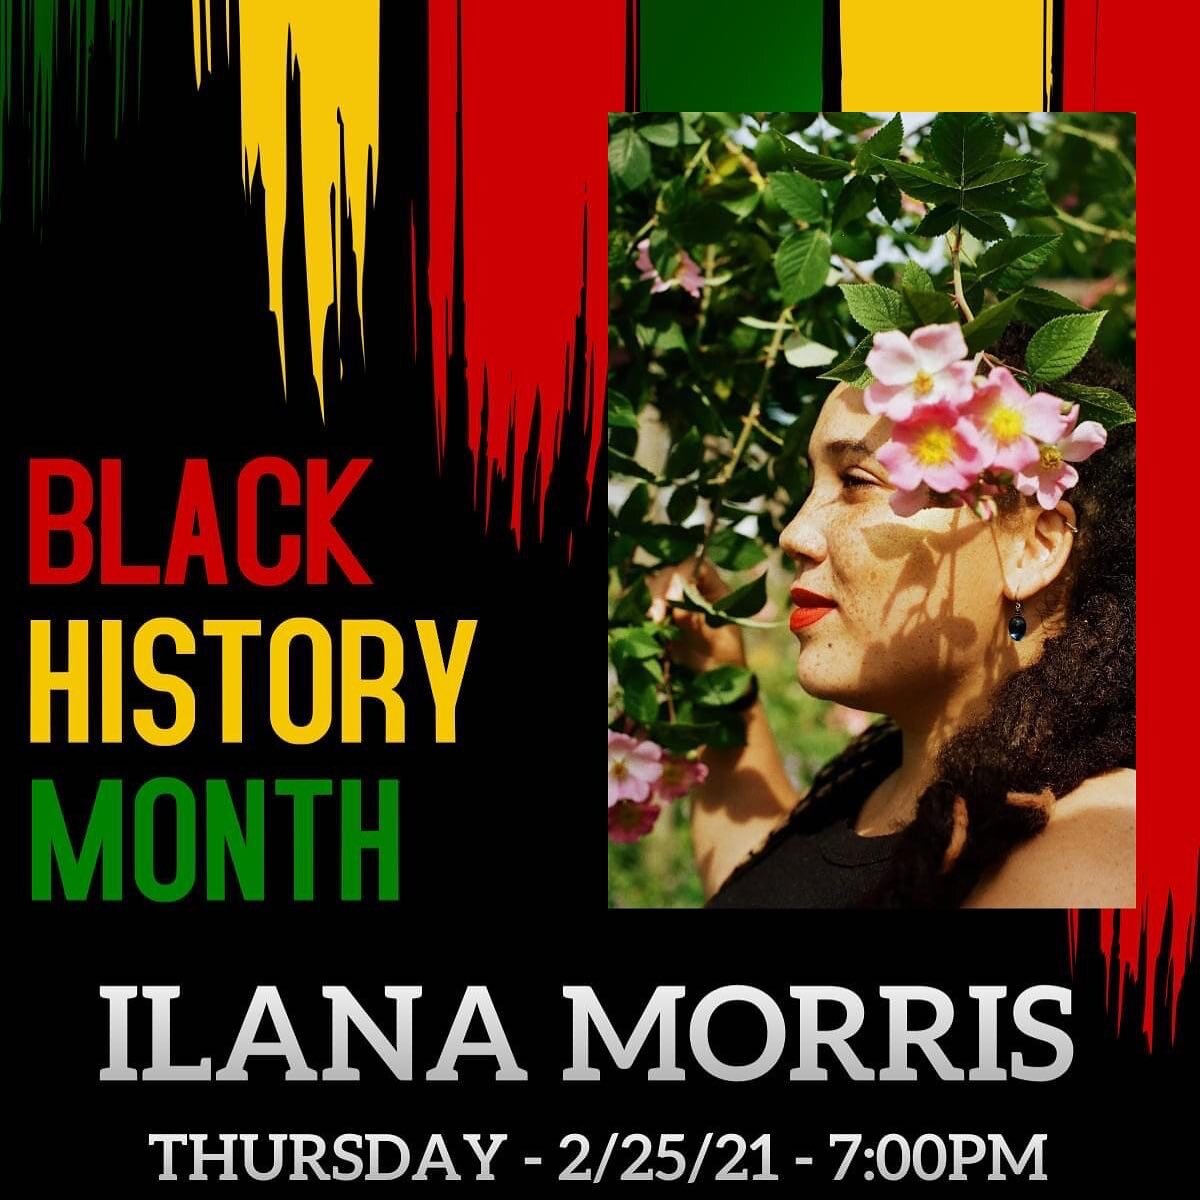 Tonight at 7! Check out @ilana.morris and @justin.henricks performing some music on the @albanynyevents Facebook/YouTube page! #BlackHistoryMonth